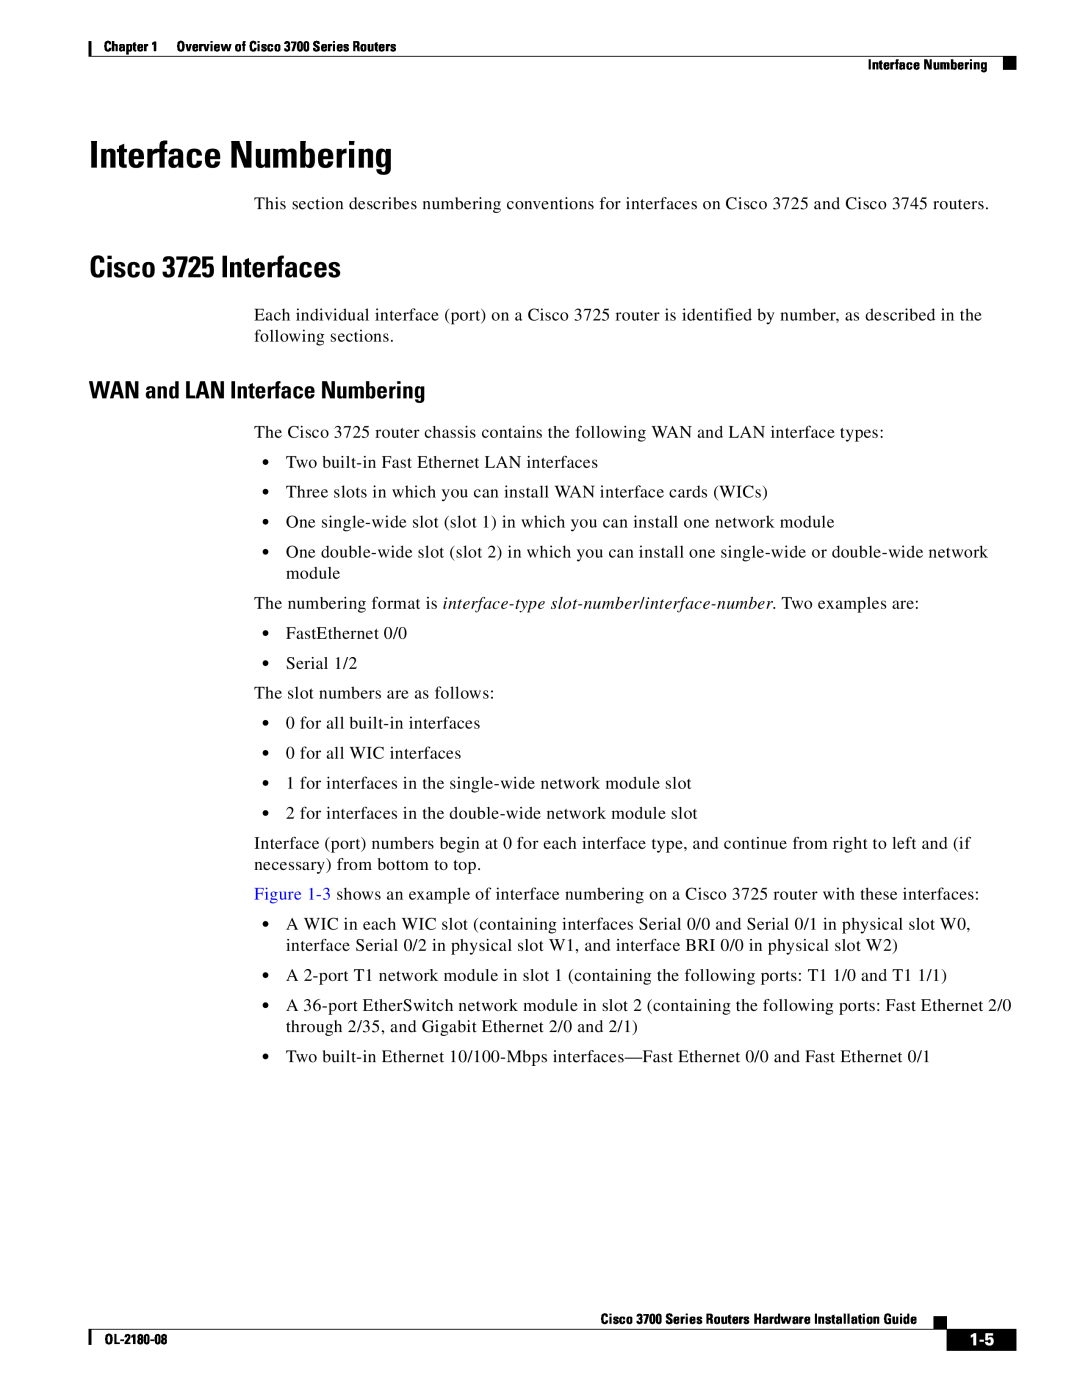 Cisco Systems 3700 Series manual Cisco 3725 Interfaces, WAN and LAN Interface Numbering 